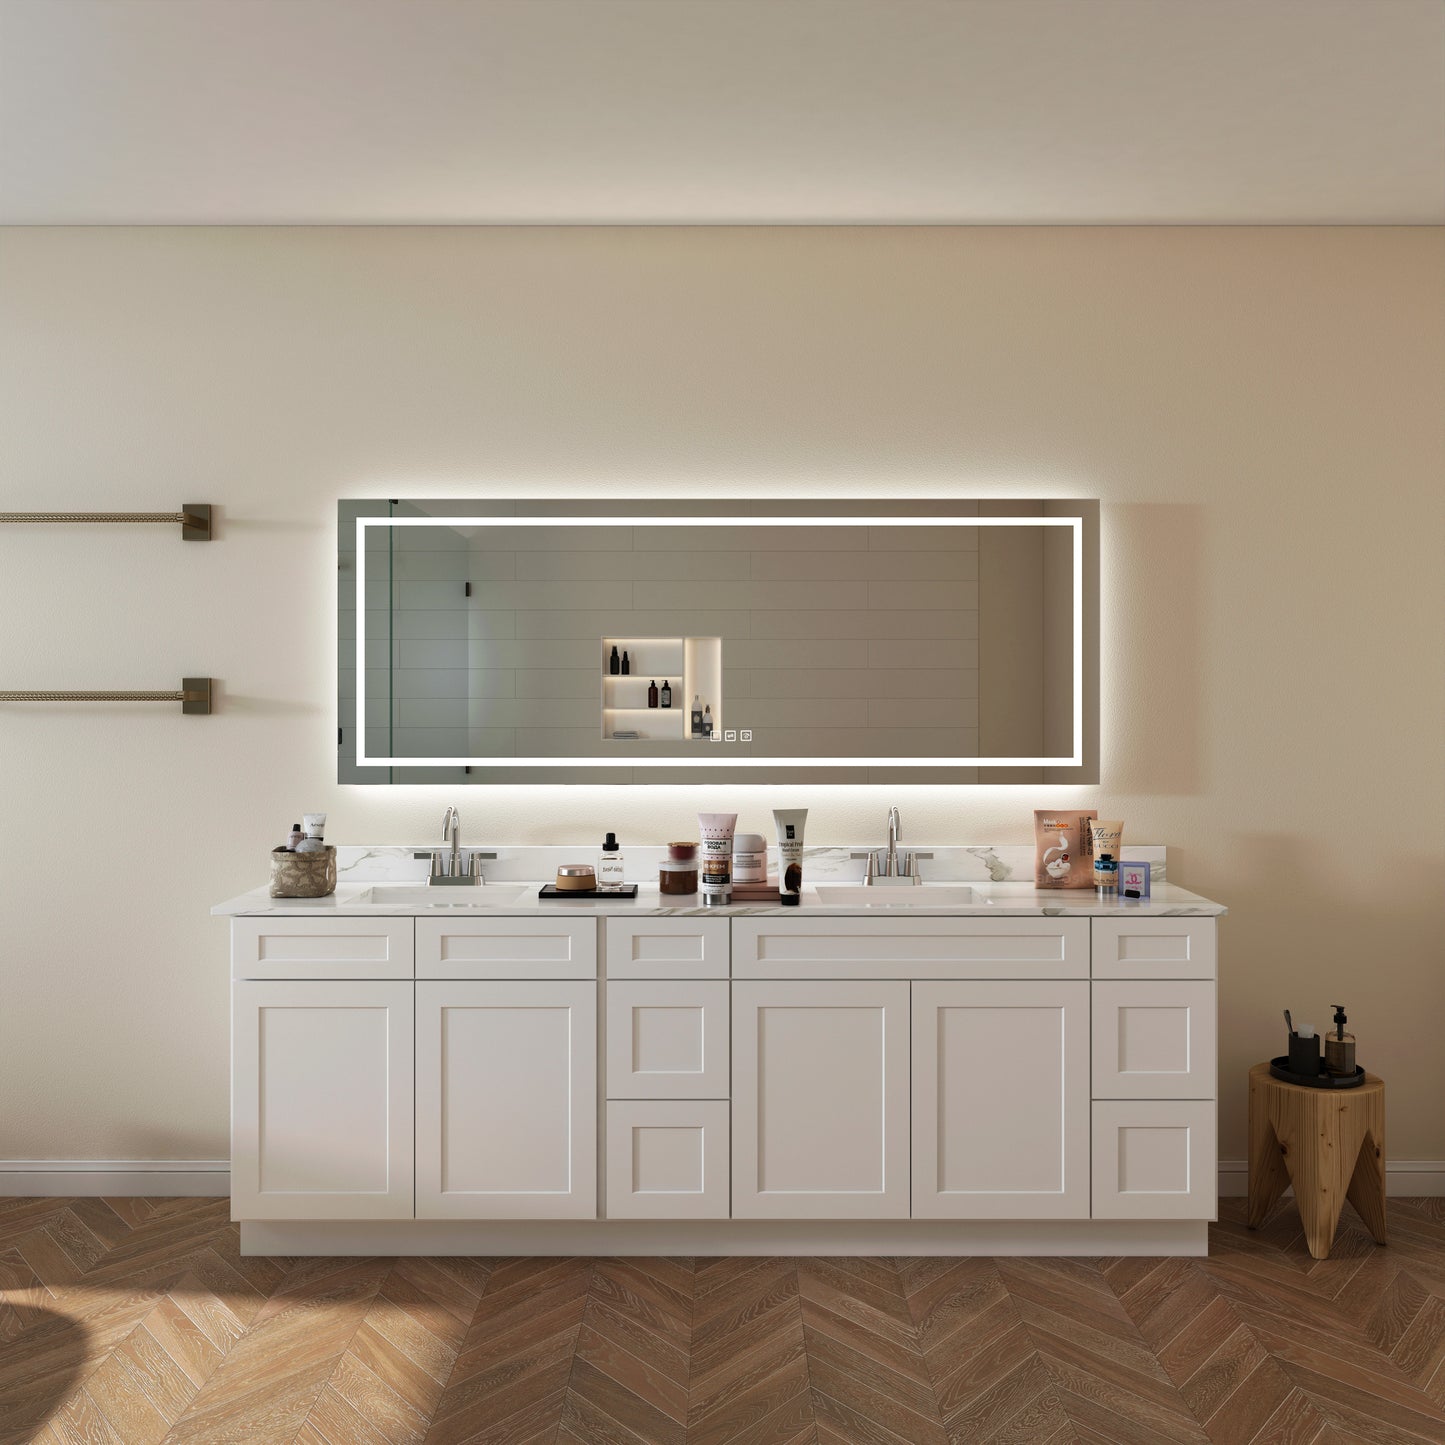 Waterpar® 84 in. W x 32 in. H Rectangular Frameless Wall Bathroom Vanity Mirror with Backlit and Front Light